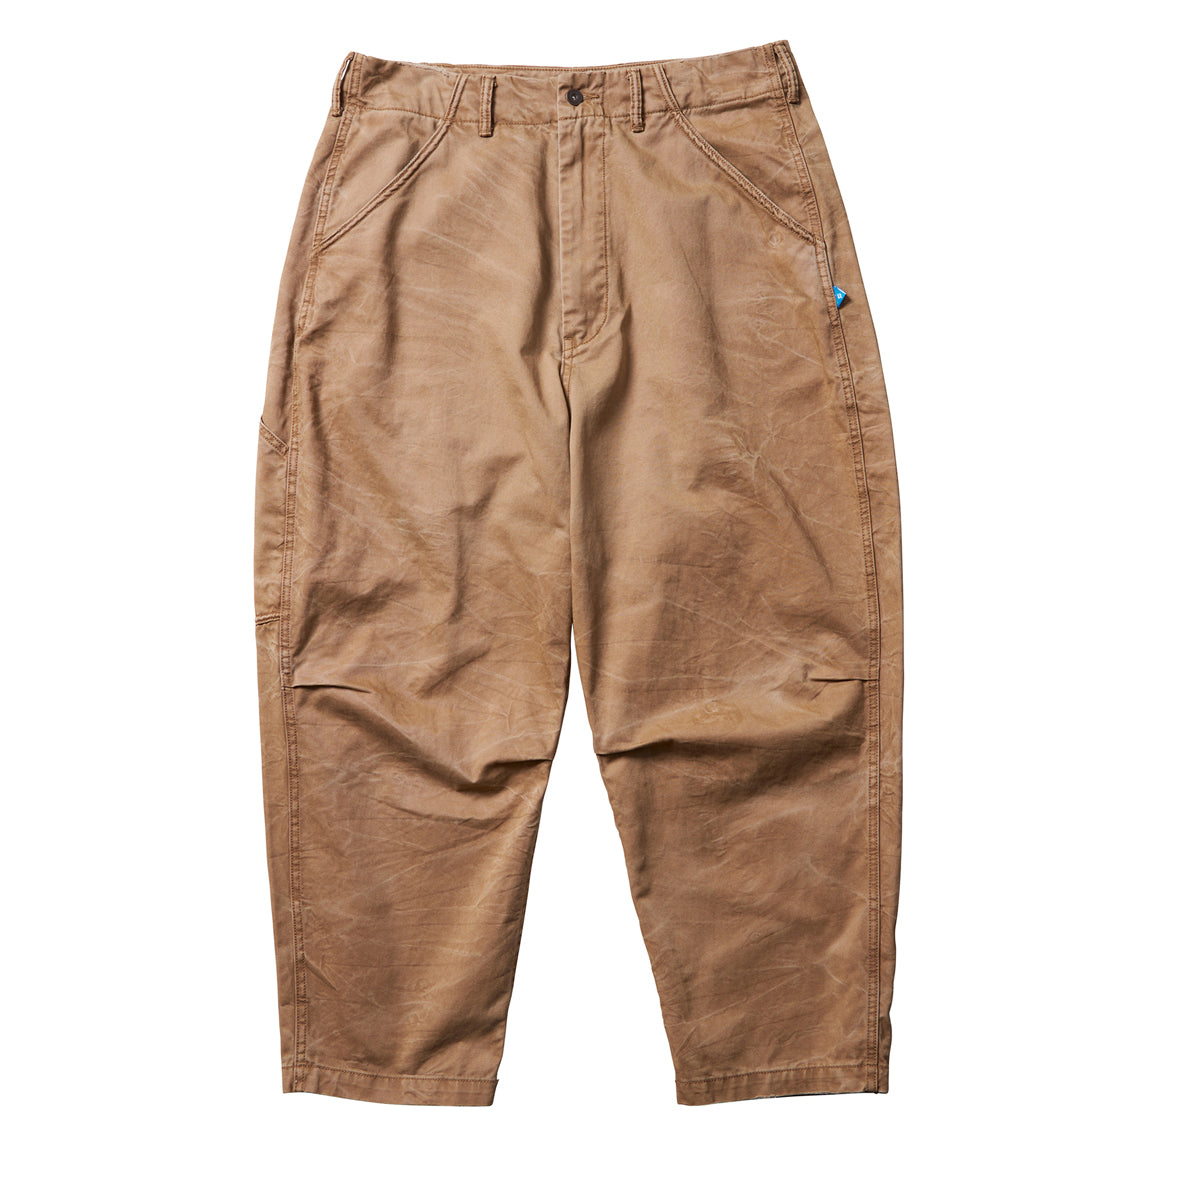 SARROUEL CHINO PAINTER PANTS – Kinetics｜OFFICIAL ONLINE STORE